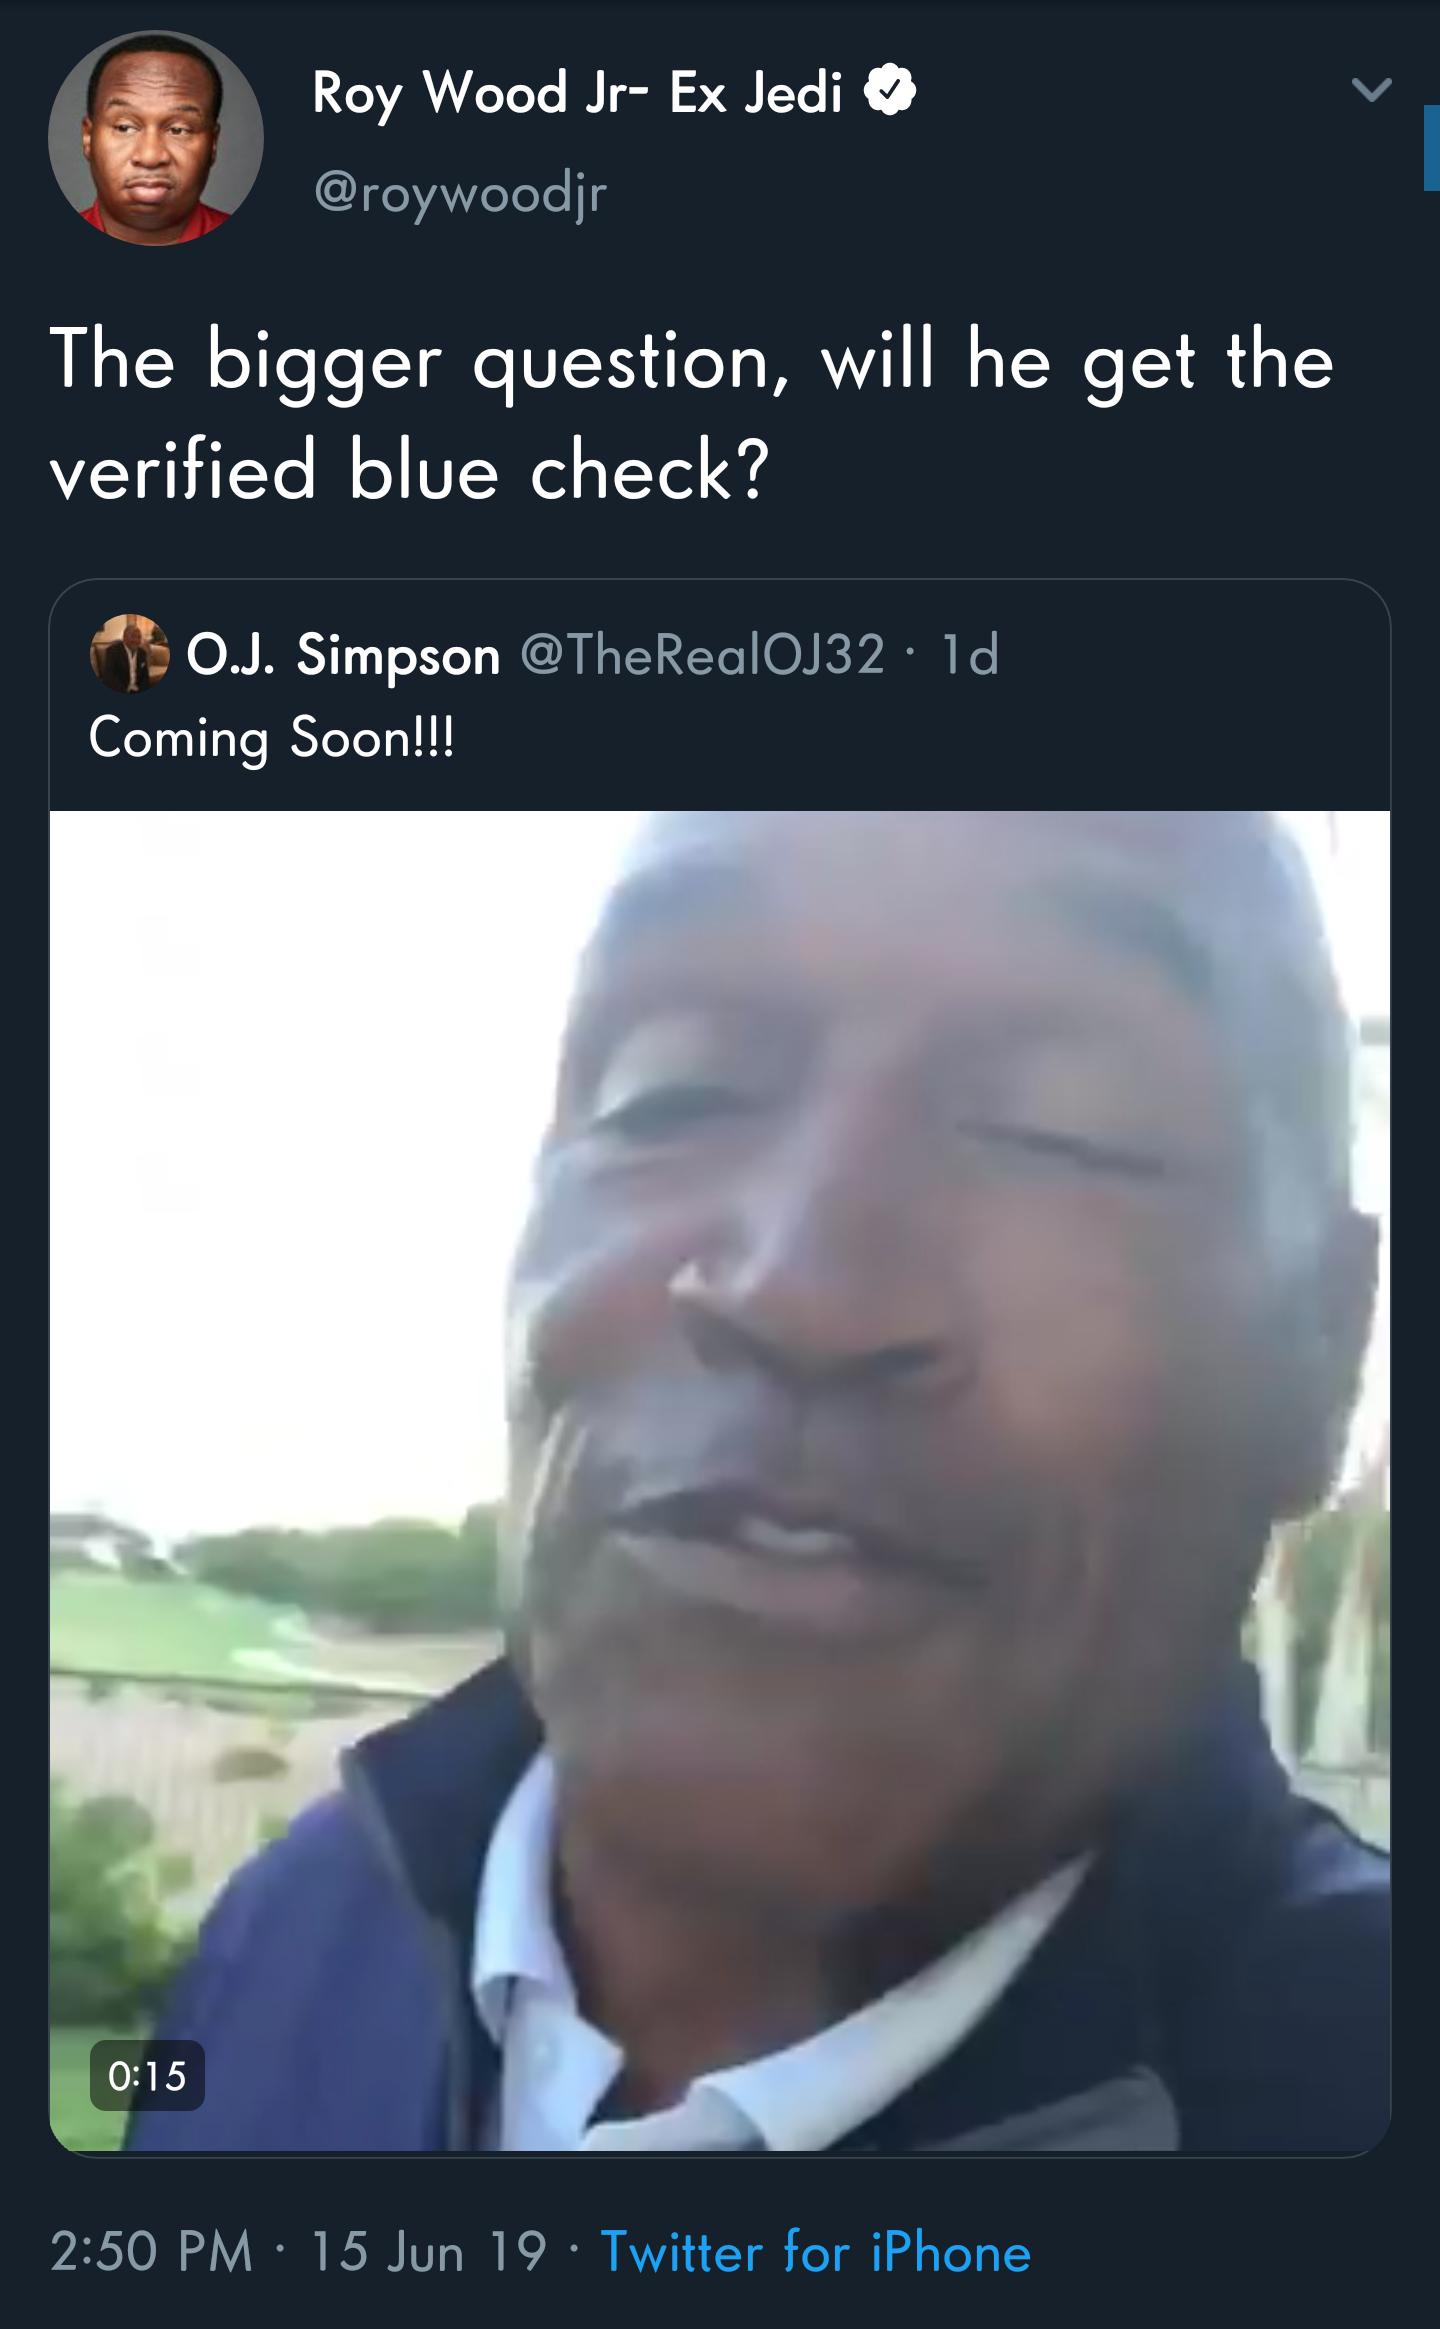 photo caption - Roy Wood Jr Ex Jedi The bigger question, will he get the verified blue check? 0.J. Simpson id Coming Soon!!! 15 Jun 19 Twitter for iPhone